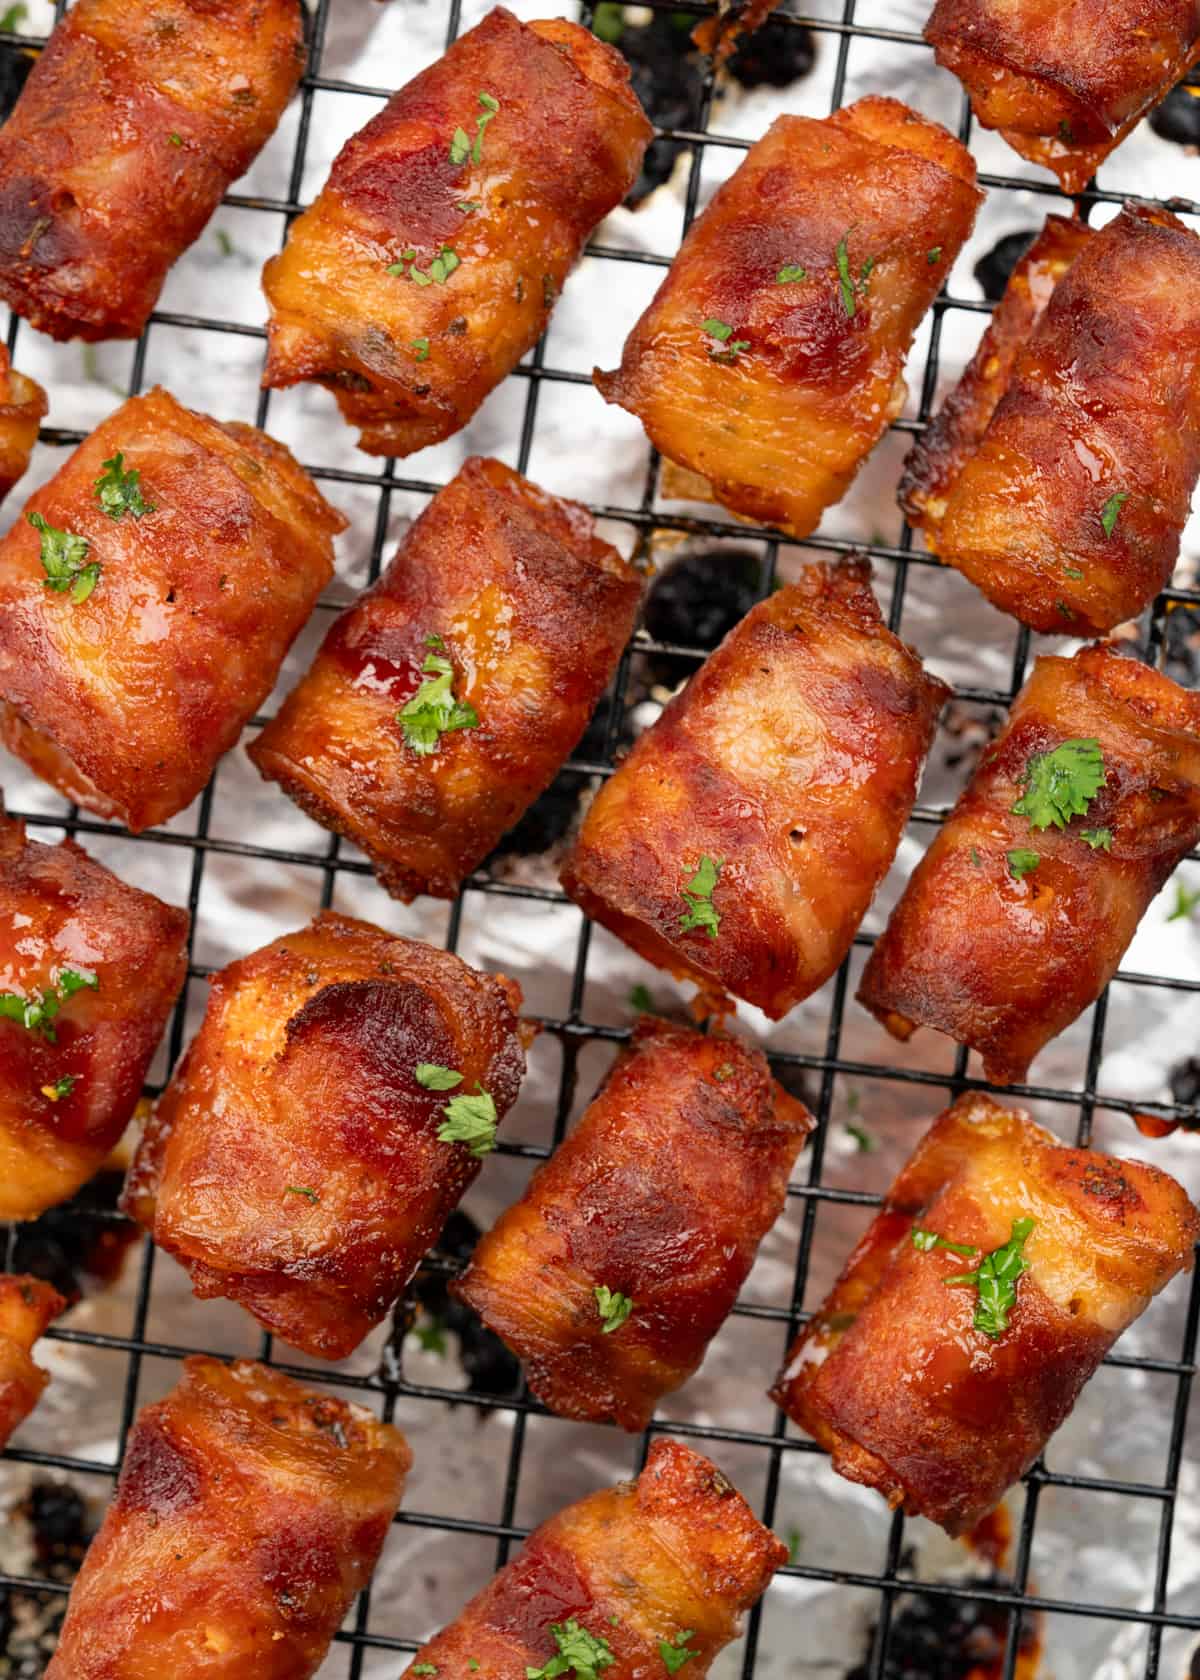 Chicken breast pieces seasoned with a sweet and spice blend, wrapped in bacon, and baked until crispy.  